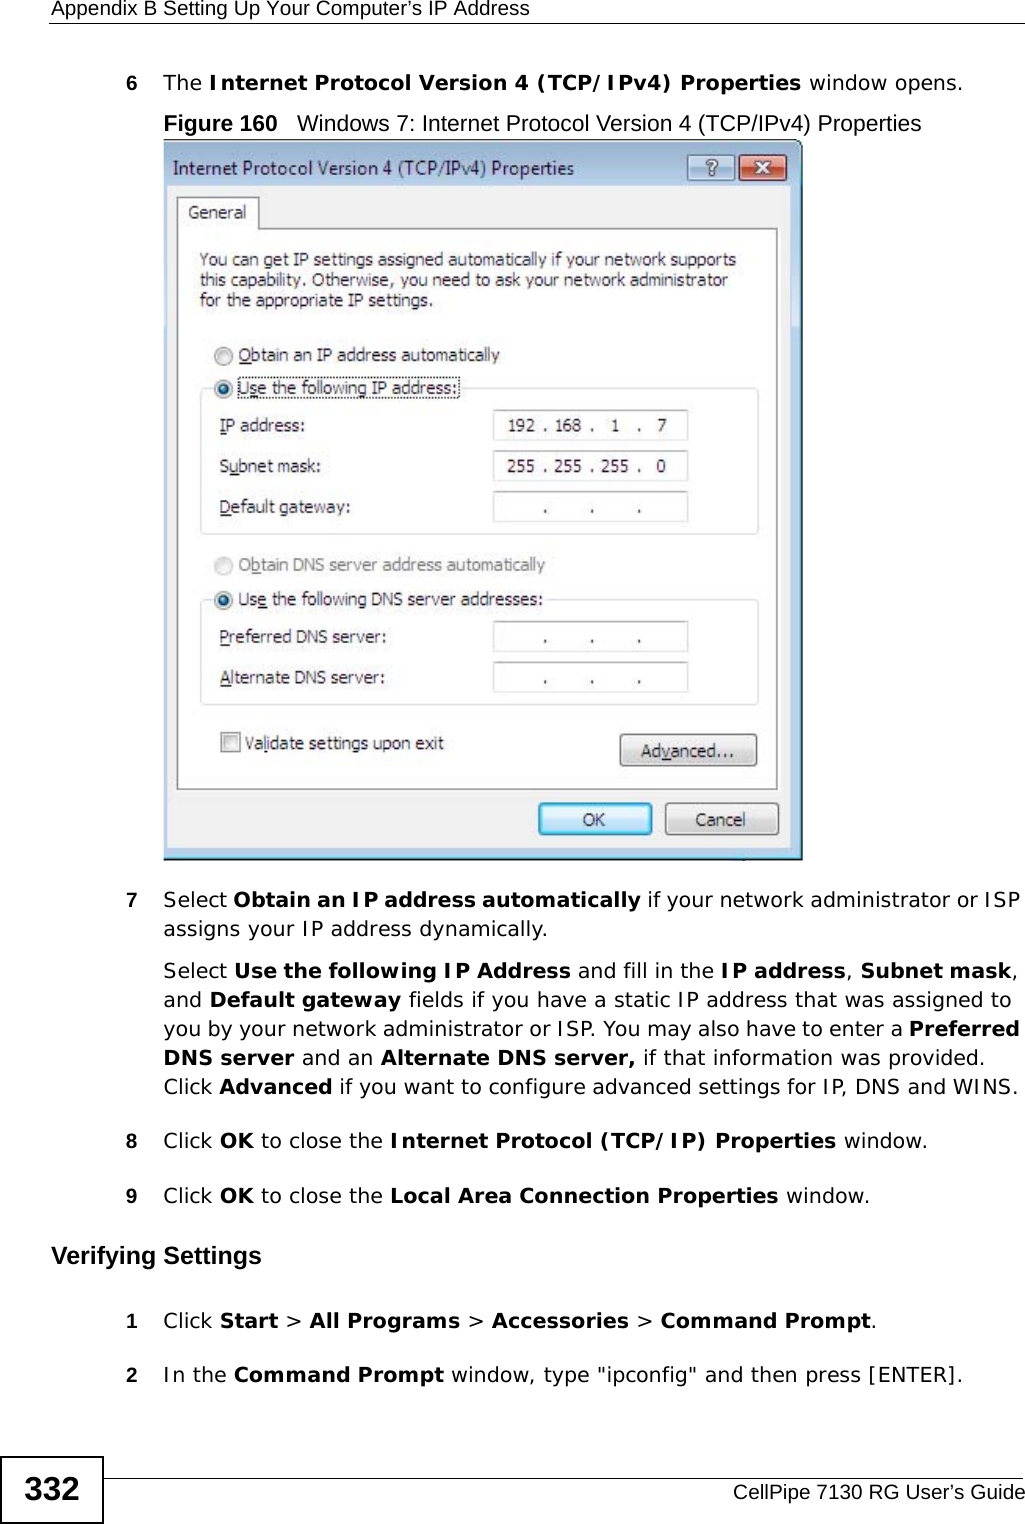 Appendix B Setting Up Your Computer’s IP AddressCellPipe 7130 RG User’s Guide3326The Internet Protocol Version 4 (TCP/IPv4) Properties window opens.Figure 160   Windows 7: Internet Protocol Version 4 (TCP/IPv4) Properties7Select Obtain an IP address automatically if your network administrator or ISP assigns your IP address dynamically.Select Use the following IP Address and fill in the IP address, Subnet mask, and Default gateway fields if you have a static IP address that was assigned to you by your network administrator or ISP. You may also have to enter a Preferred DNS server and an Alternate DNS server, if that information was provided. Click Advanced if you want to configure advanced settings for IP, DNS and WINS. 8Click OK to close the Internet Protocol (TCP/IP) Properties window.9Click OK to close the Local Area Connection Properties window.Verifying Settings1Click Start &gt; All Programs &gt; Accessories &gt; Command Prompt.2In the Command Prompt window, type &quot;ipconfig&quot; and then press [ENTER]. 